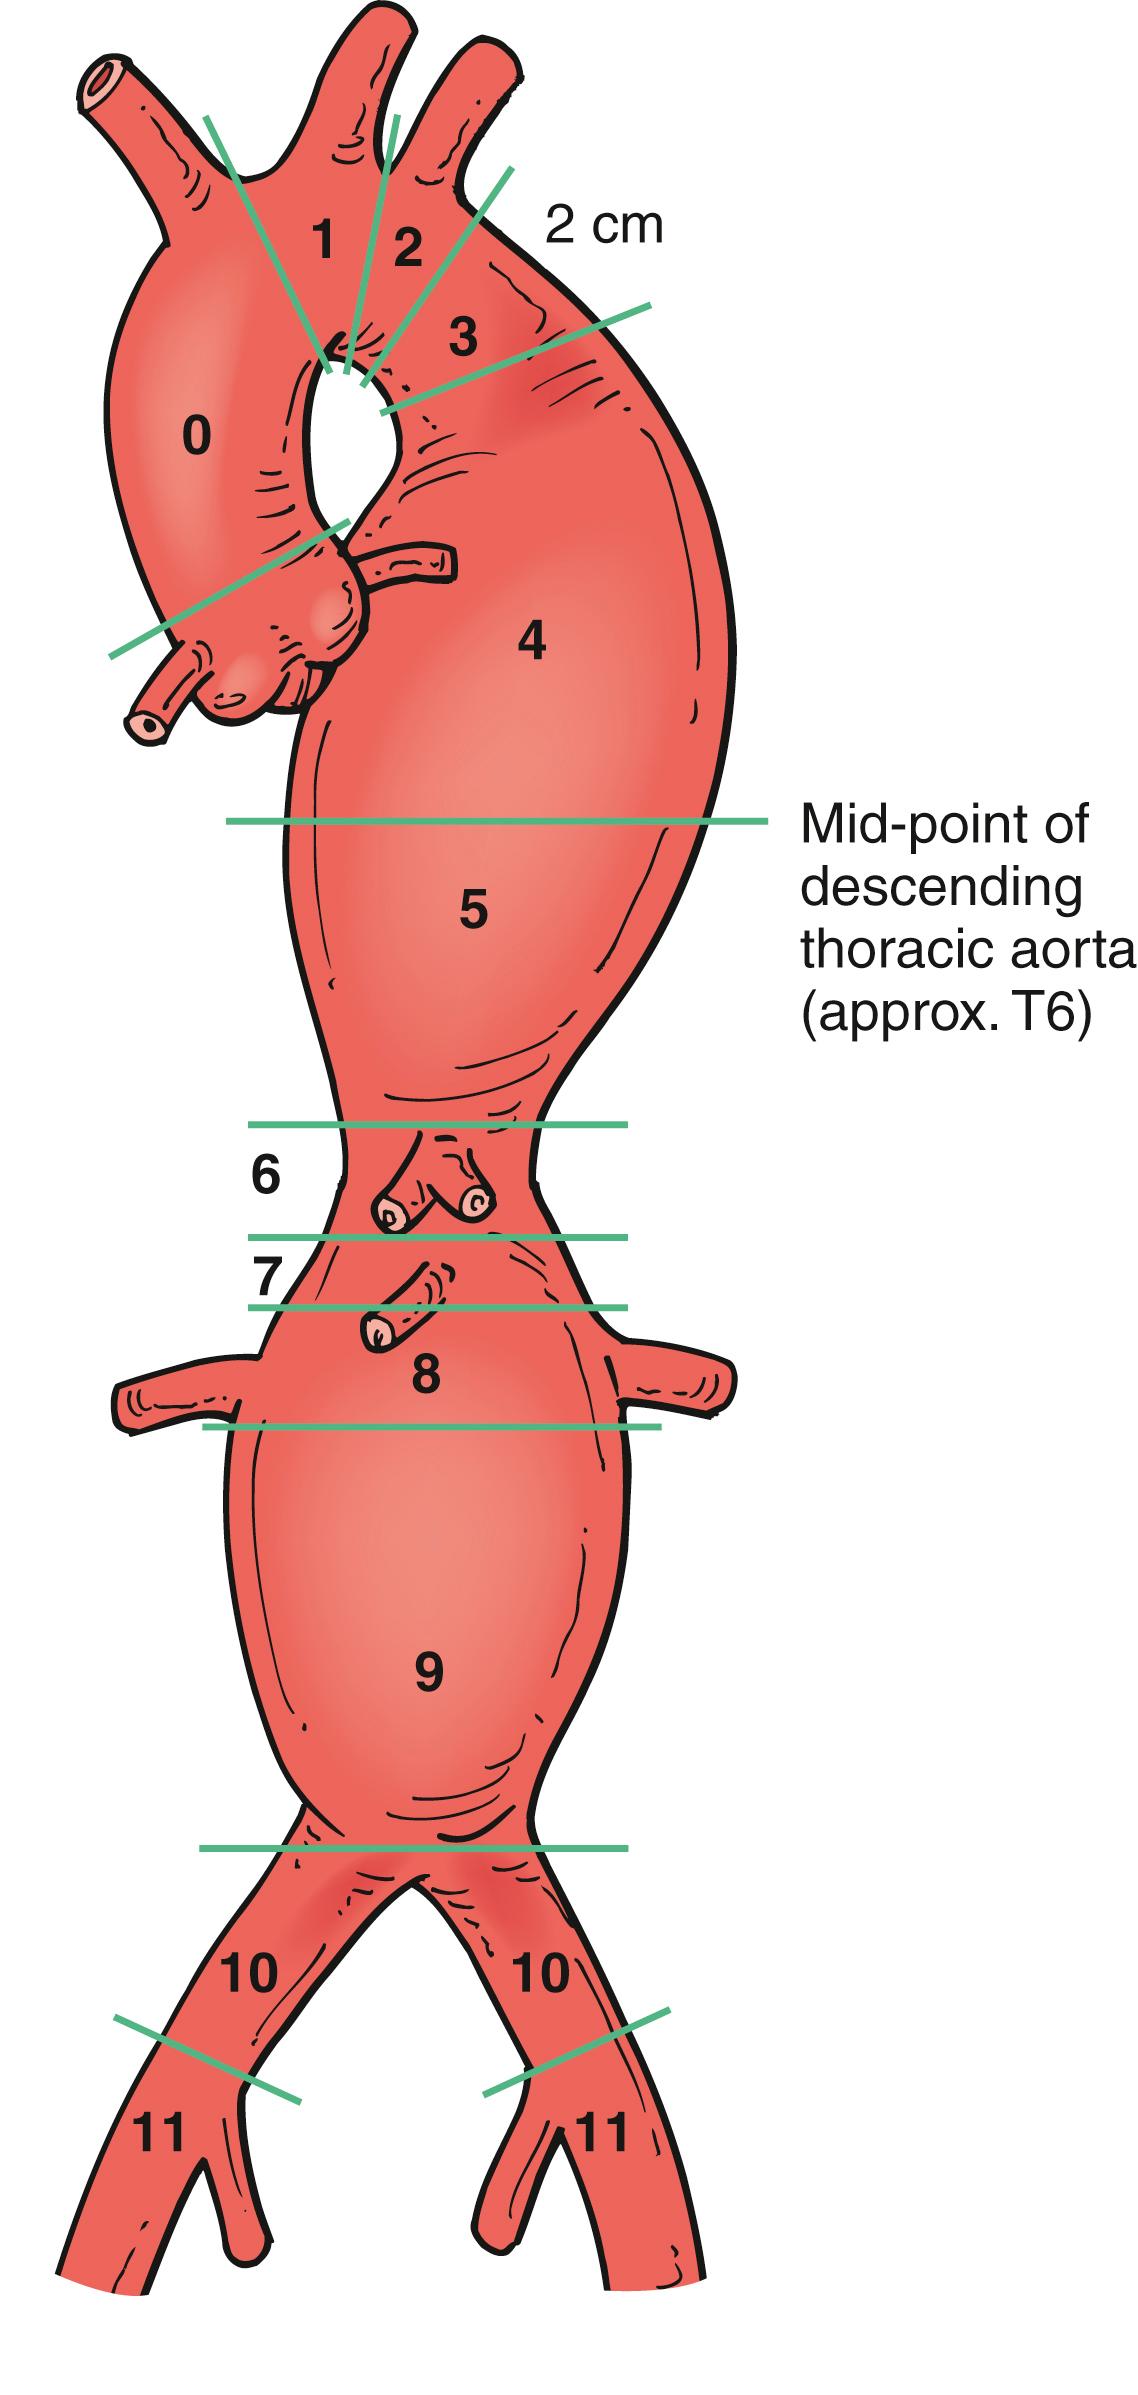 Figure 80.6, Eleven landing zones for thoracic aorta interventions.